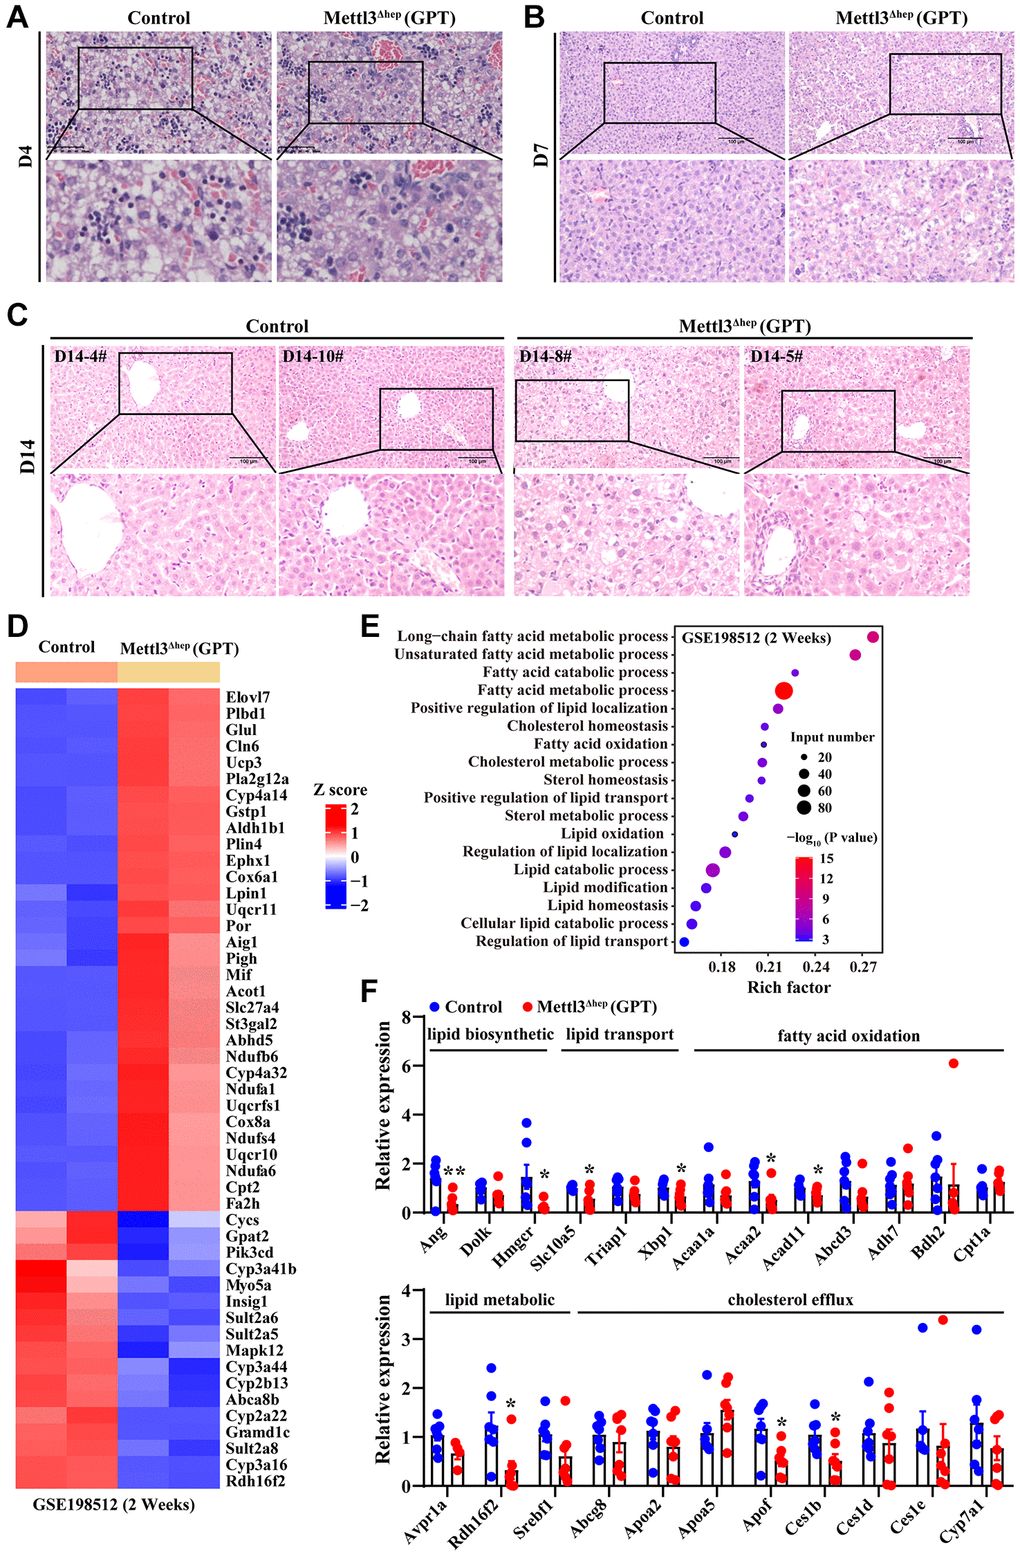 Hepatic METTL3 homozygous knockout by Alb-iCre mice (GPT) induces abnormal lipid accumulation in mouse hepatocytes. (A–C) Representative H&E staining photographs of liver sections from control mice and METTL3Δhep mice (GPT) at 4 (A), 7 (B) and 14 (C) days postnatally. Scale bar = 100 μm. (D) Heatmap depicts the differential expression of hepatic lipid metabolism-related genes from RNA-seq results deposited in NCBI GEO under the accession number GSE198512 [17]. In the cluster heatmap, class comparison and hierarchical clustering of differentially expressed genes (DEGs) involved in hepatic lipid metabolism were performed between control mice and METTL3Δhep mice (GPT) at 2 weeks after birth. Genes with increased and reduced expressions are shown in red and blue, respectively. (E) GO analysis of up- and downregulated genes related with hepatic lipid metabolism (from RNA-seq data deposited in GEO under accession number GSE198512) in the liver of control mice and METTL3Δhep mice (GPT) at 2 weeks after birth. (F) qRT-PCR analysis of the mRNA expression of genes related with to fatty acid oxidation, cholesterol efflux, lipid metabolic process, lipid transport and lipid biosynthetic process in the livers of METTL3Δhep mice (GPT).